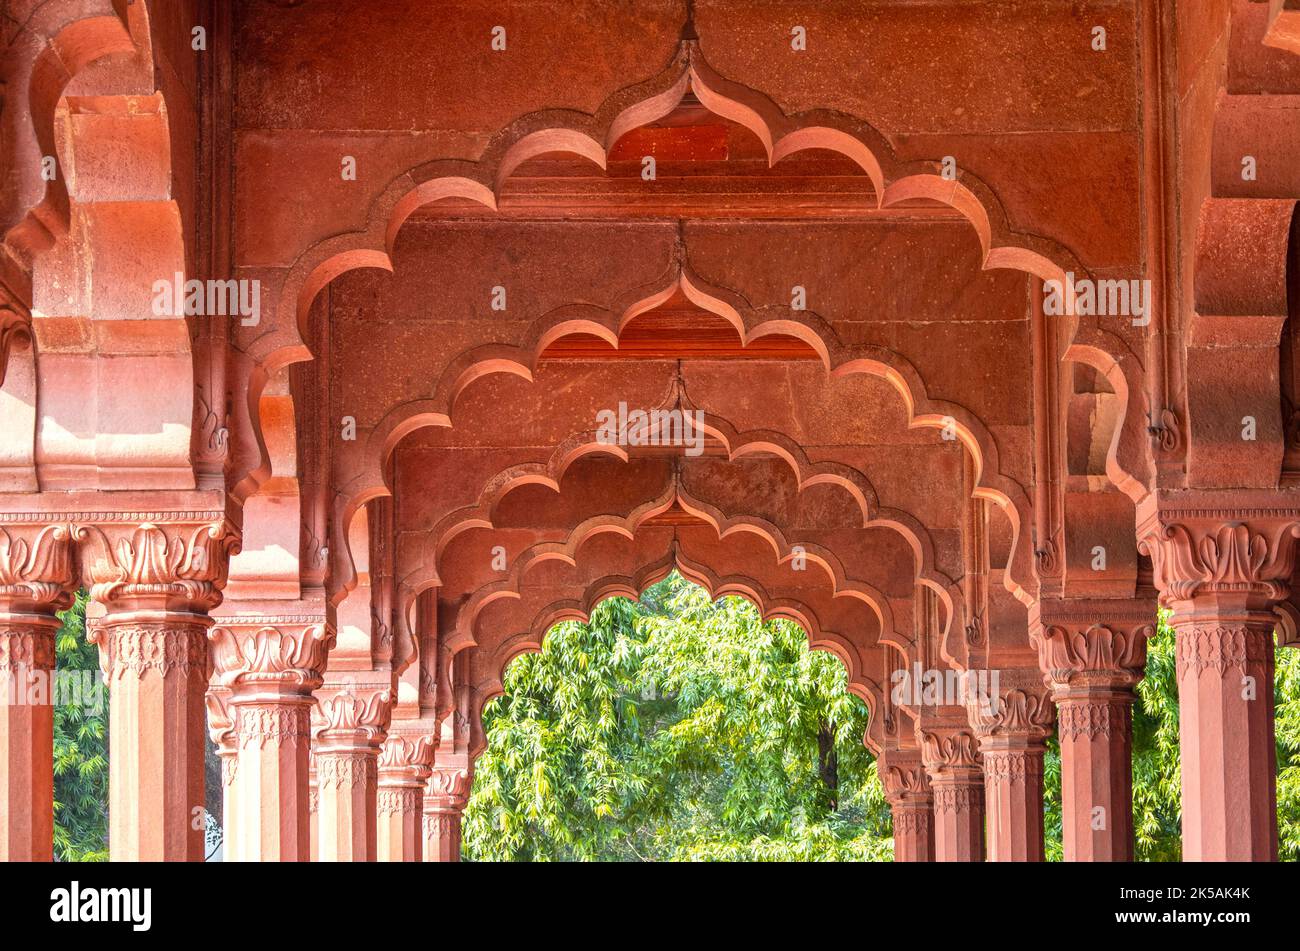 The Diwan-i-Aam audience hall as part of The Red Fort in New Delhi in India Stock Photo